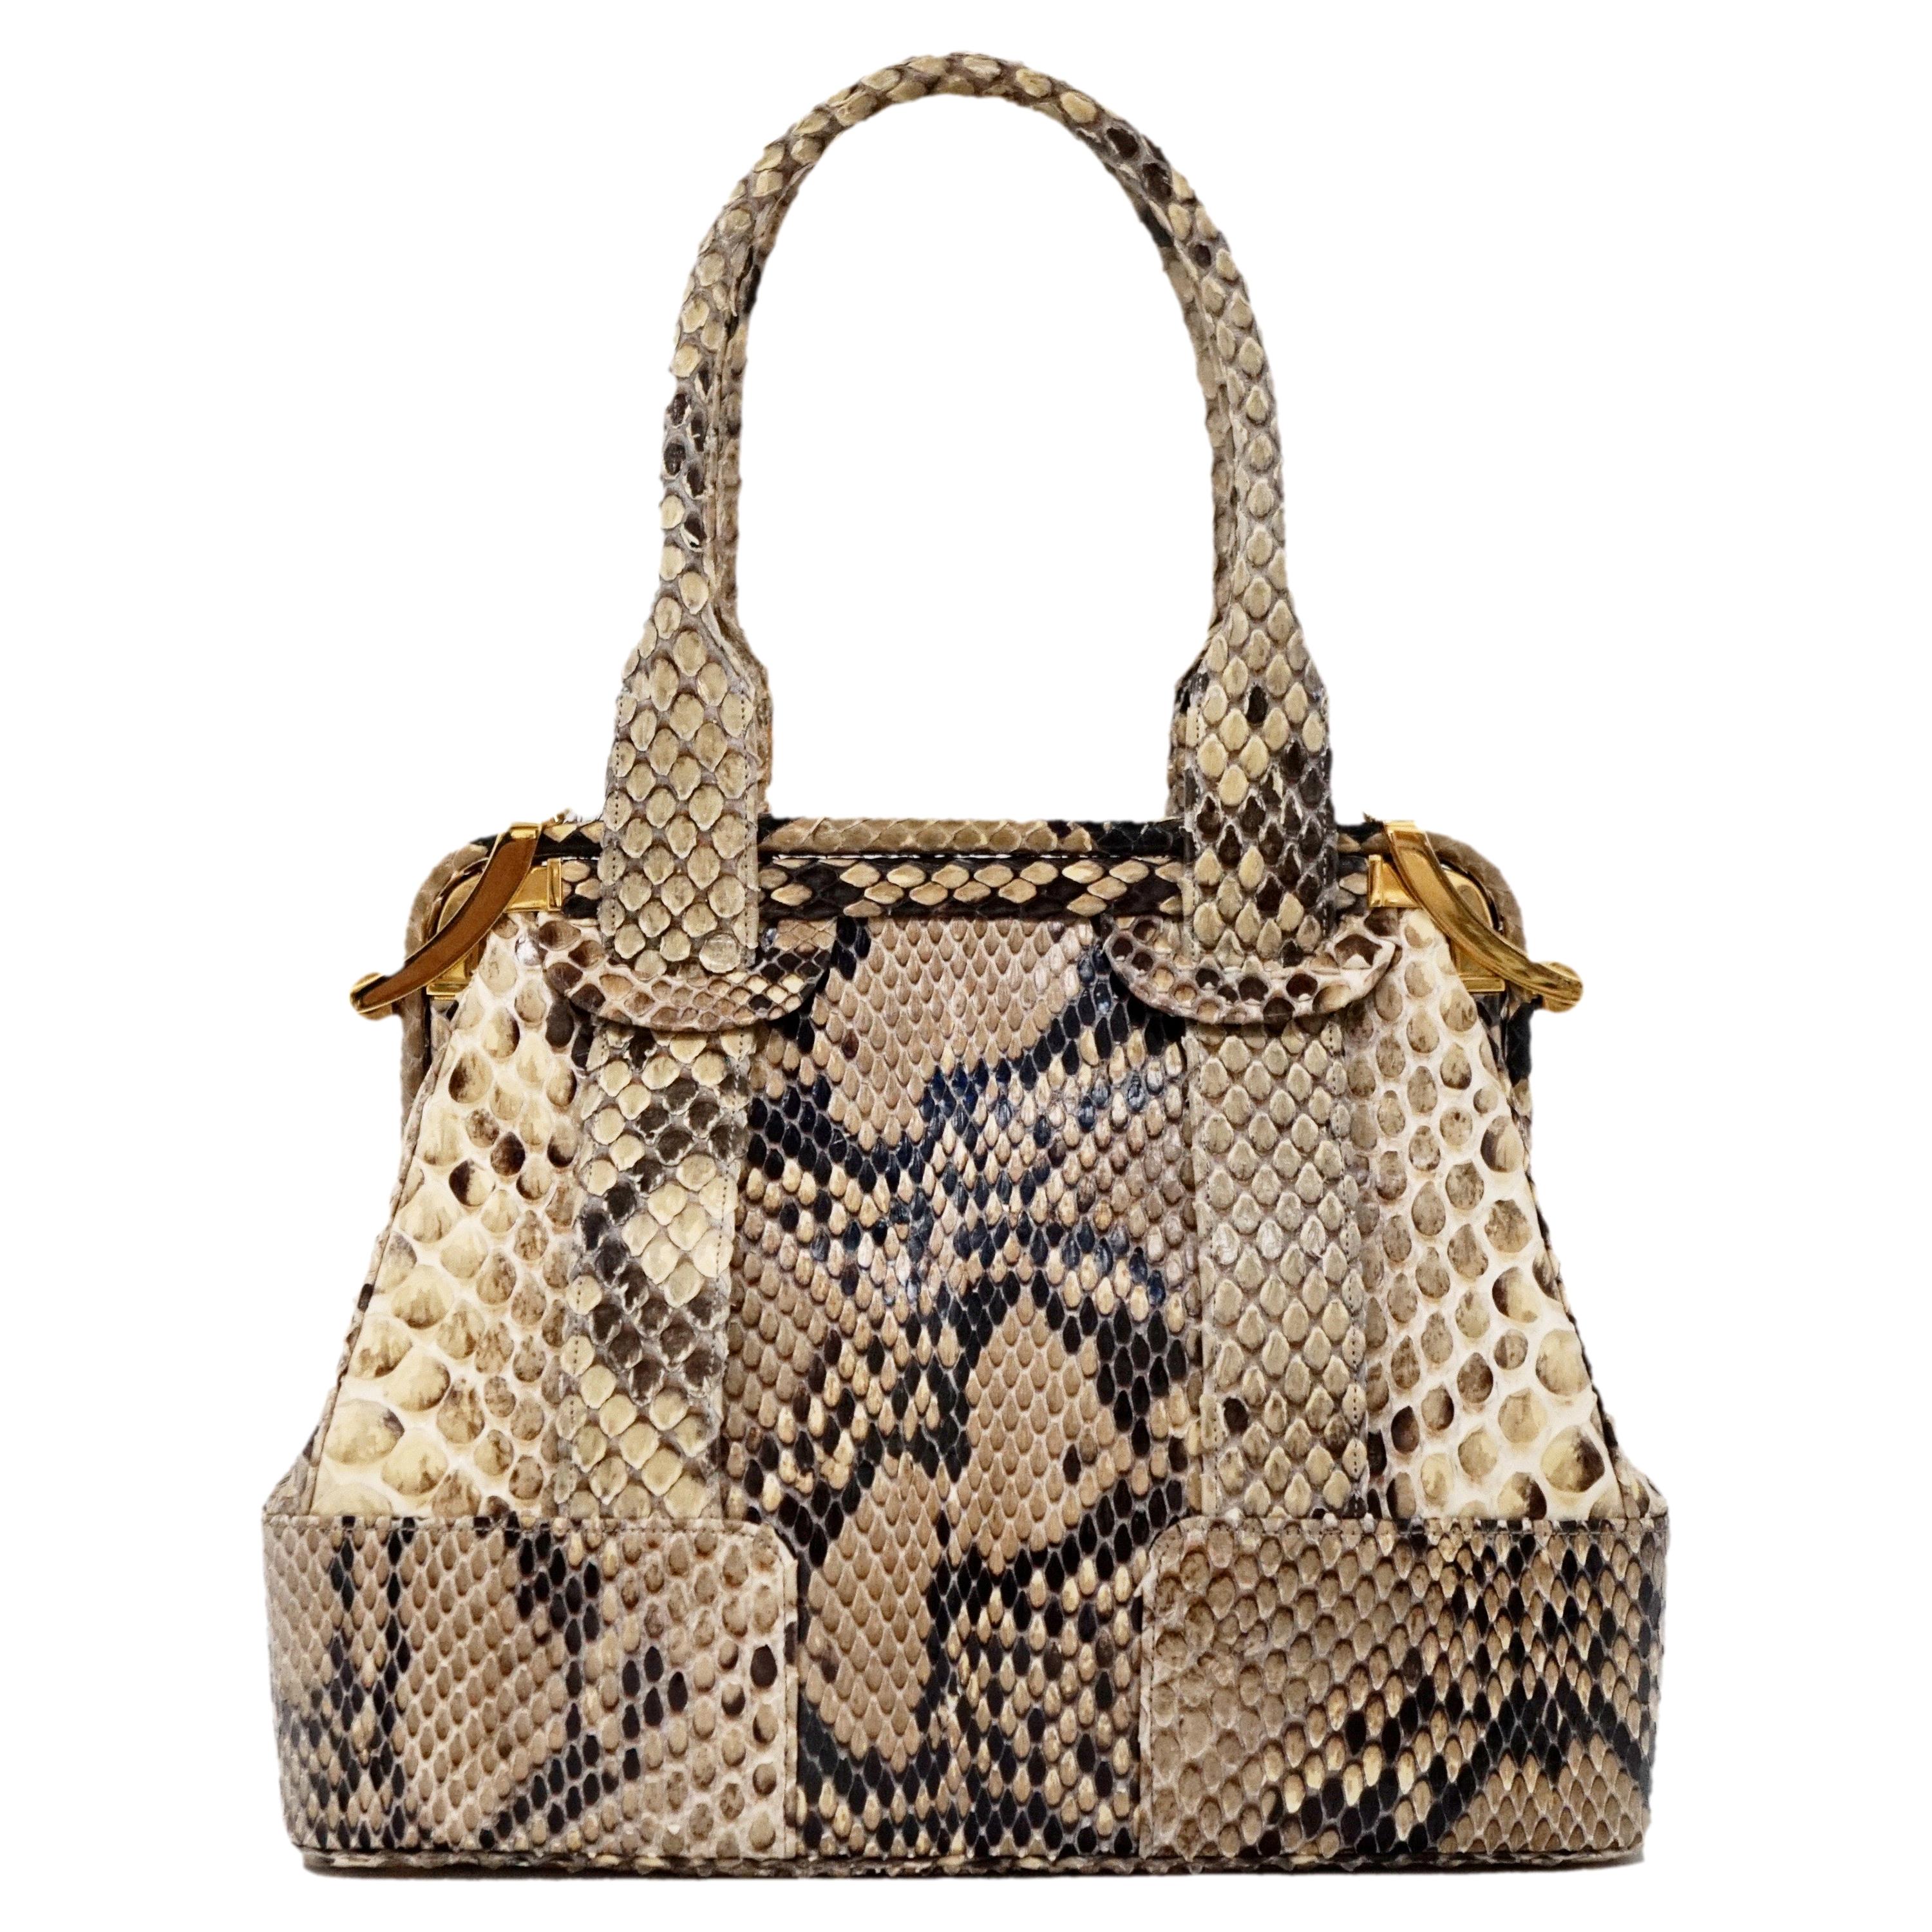 Judith Leiber Python Structured Frame Bag with Trio of Accessories